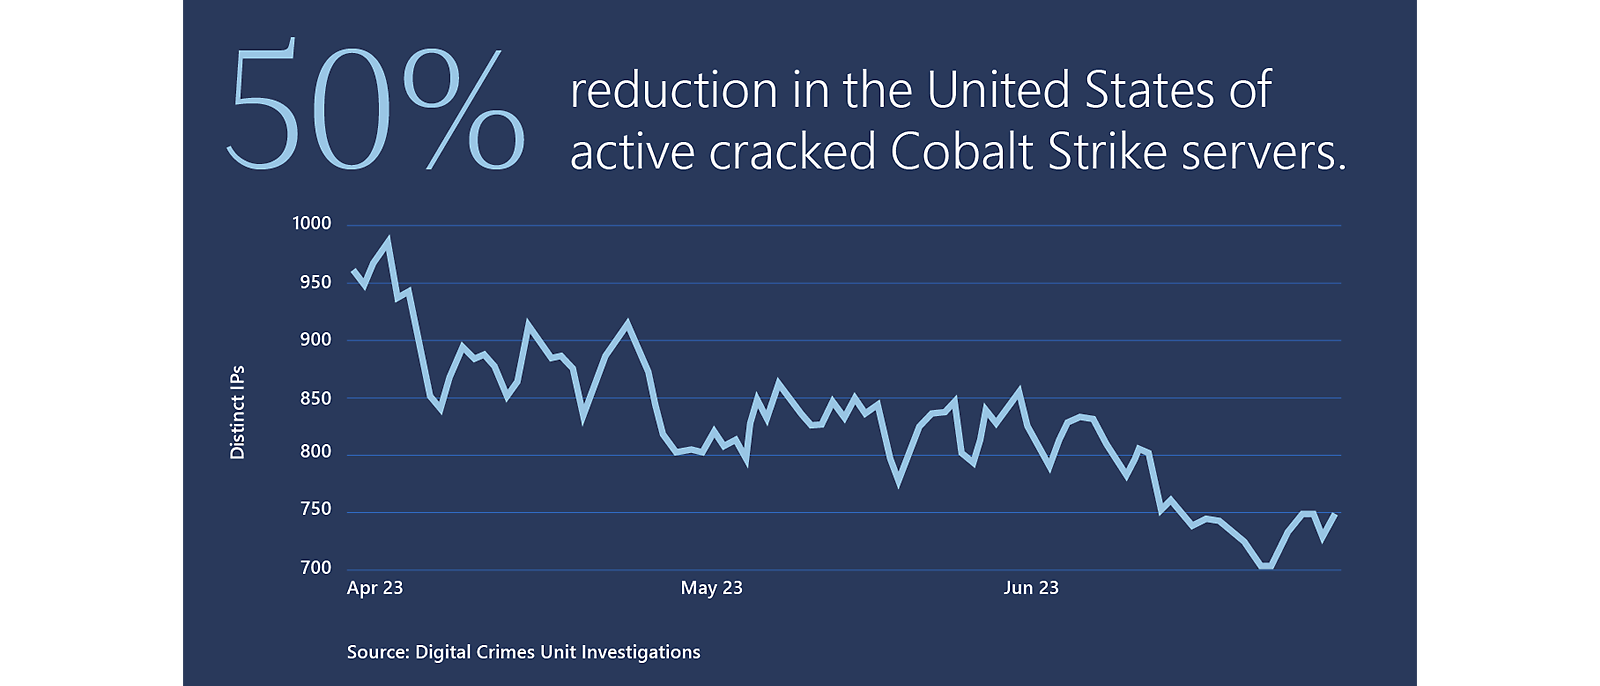 Graphic showing a 50% reduction in active cracked Cobalt Strike servers in the United States.